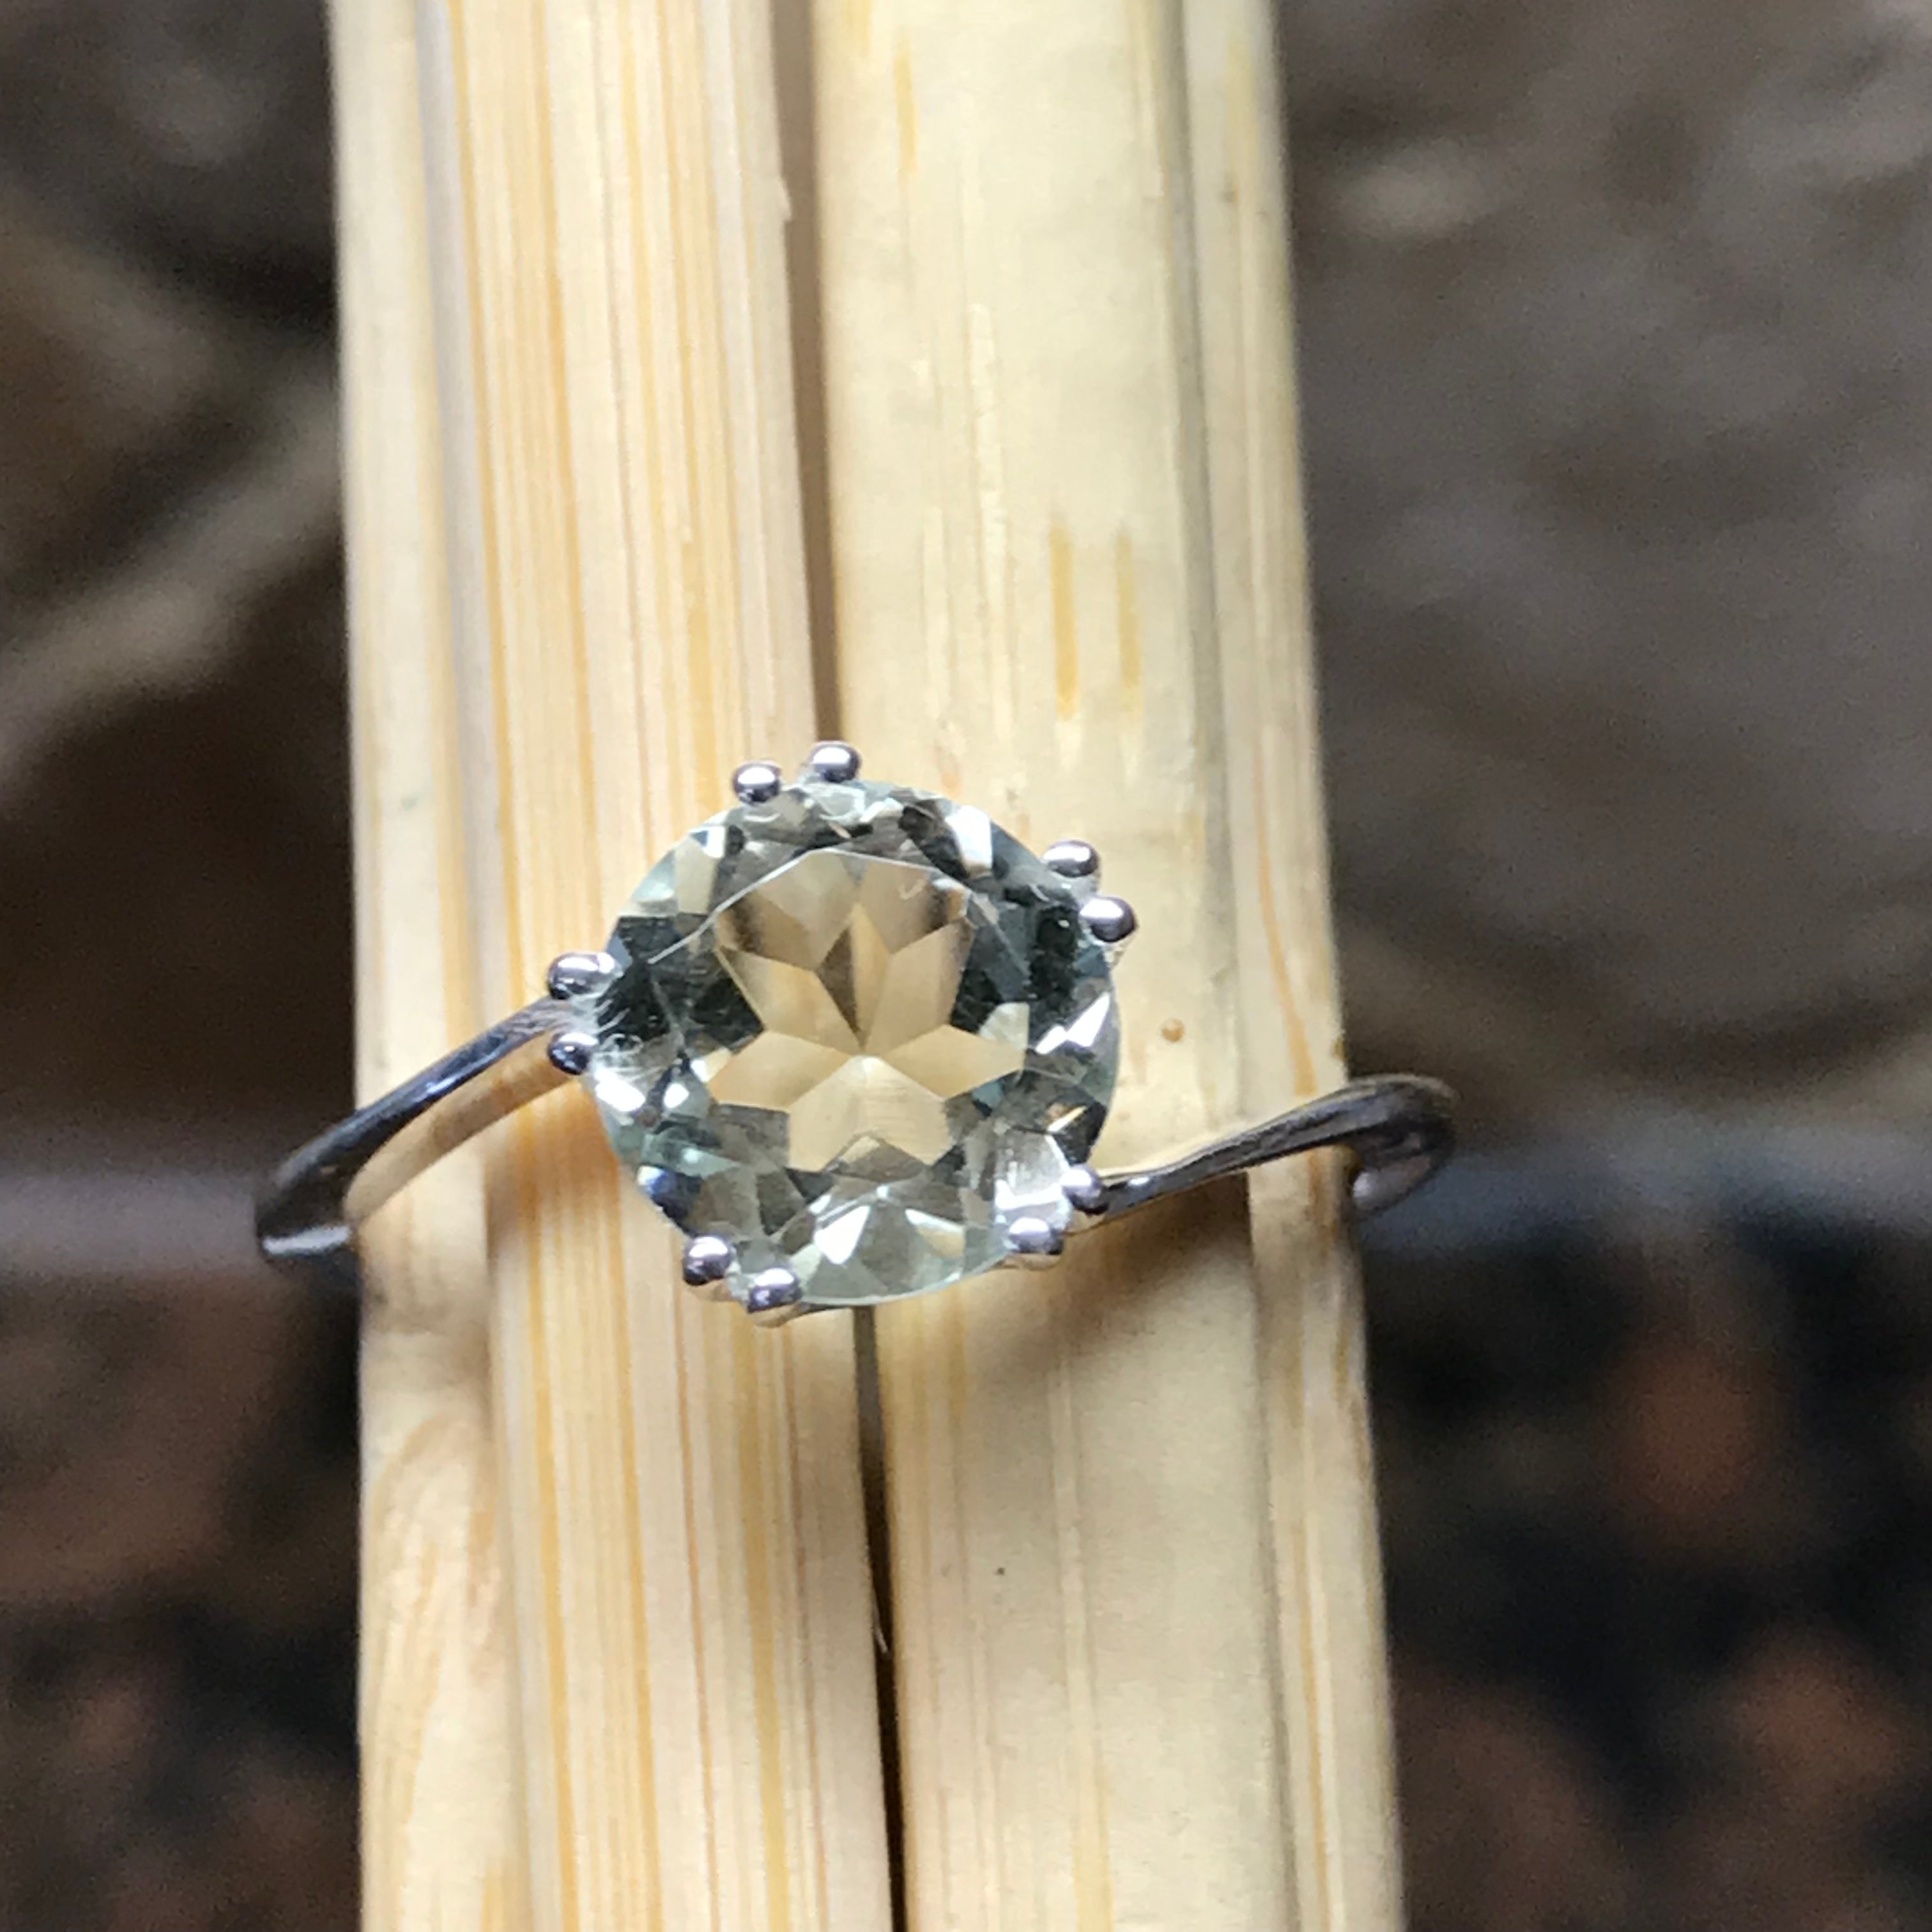 Natural 1.25ct Green Amethyst 925 Solid Sterling Silver Engagement Ring Size 5, 6, 7, 8, 9, 10 - Natural Rocks by Kala